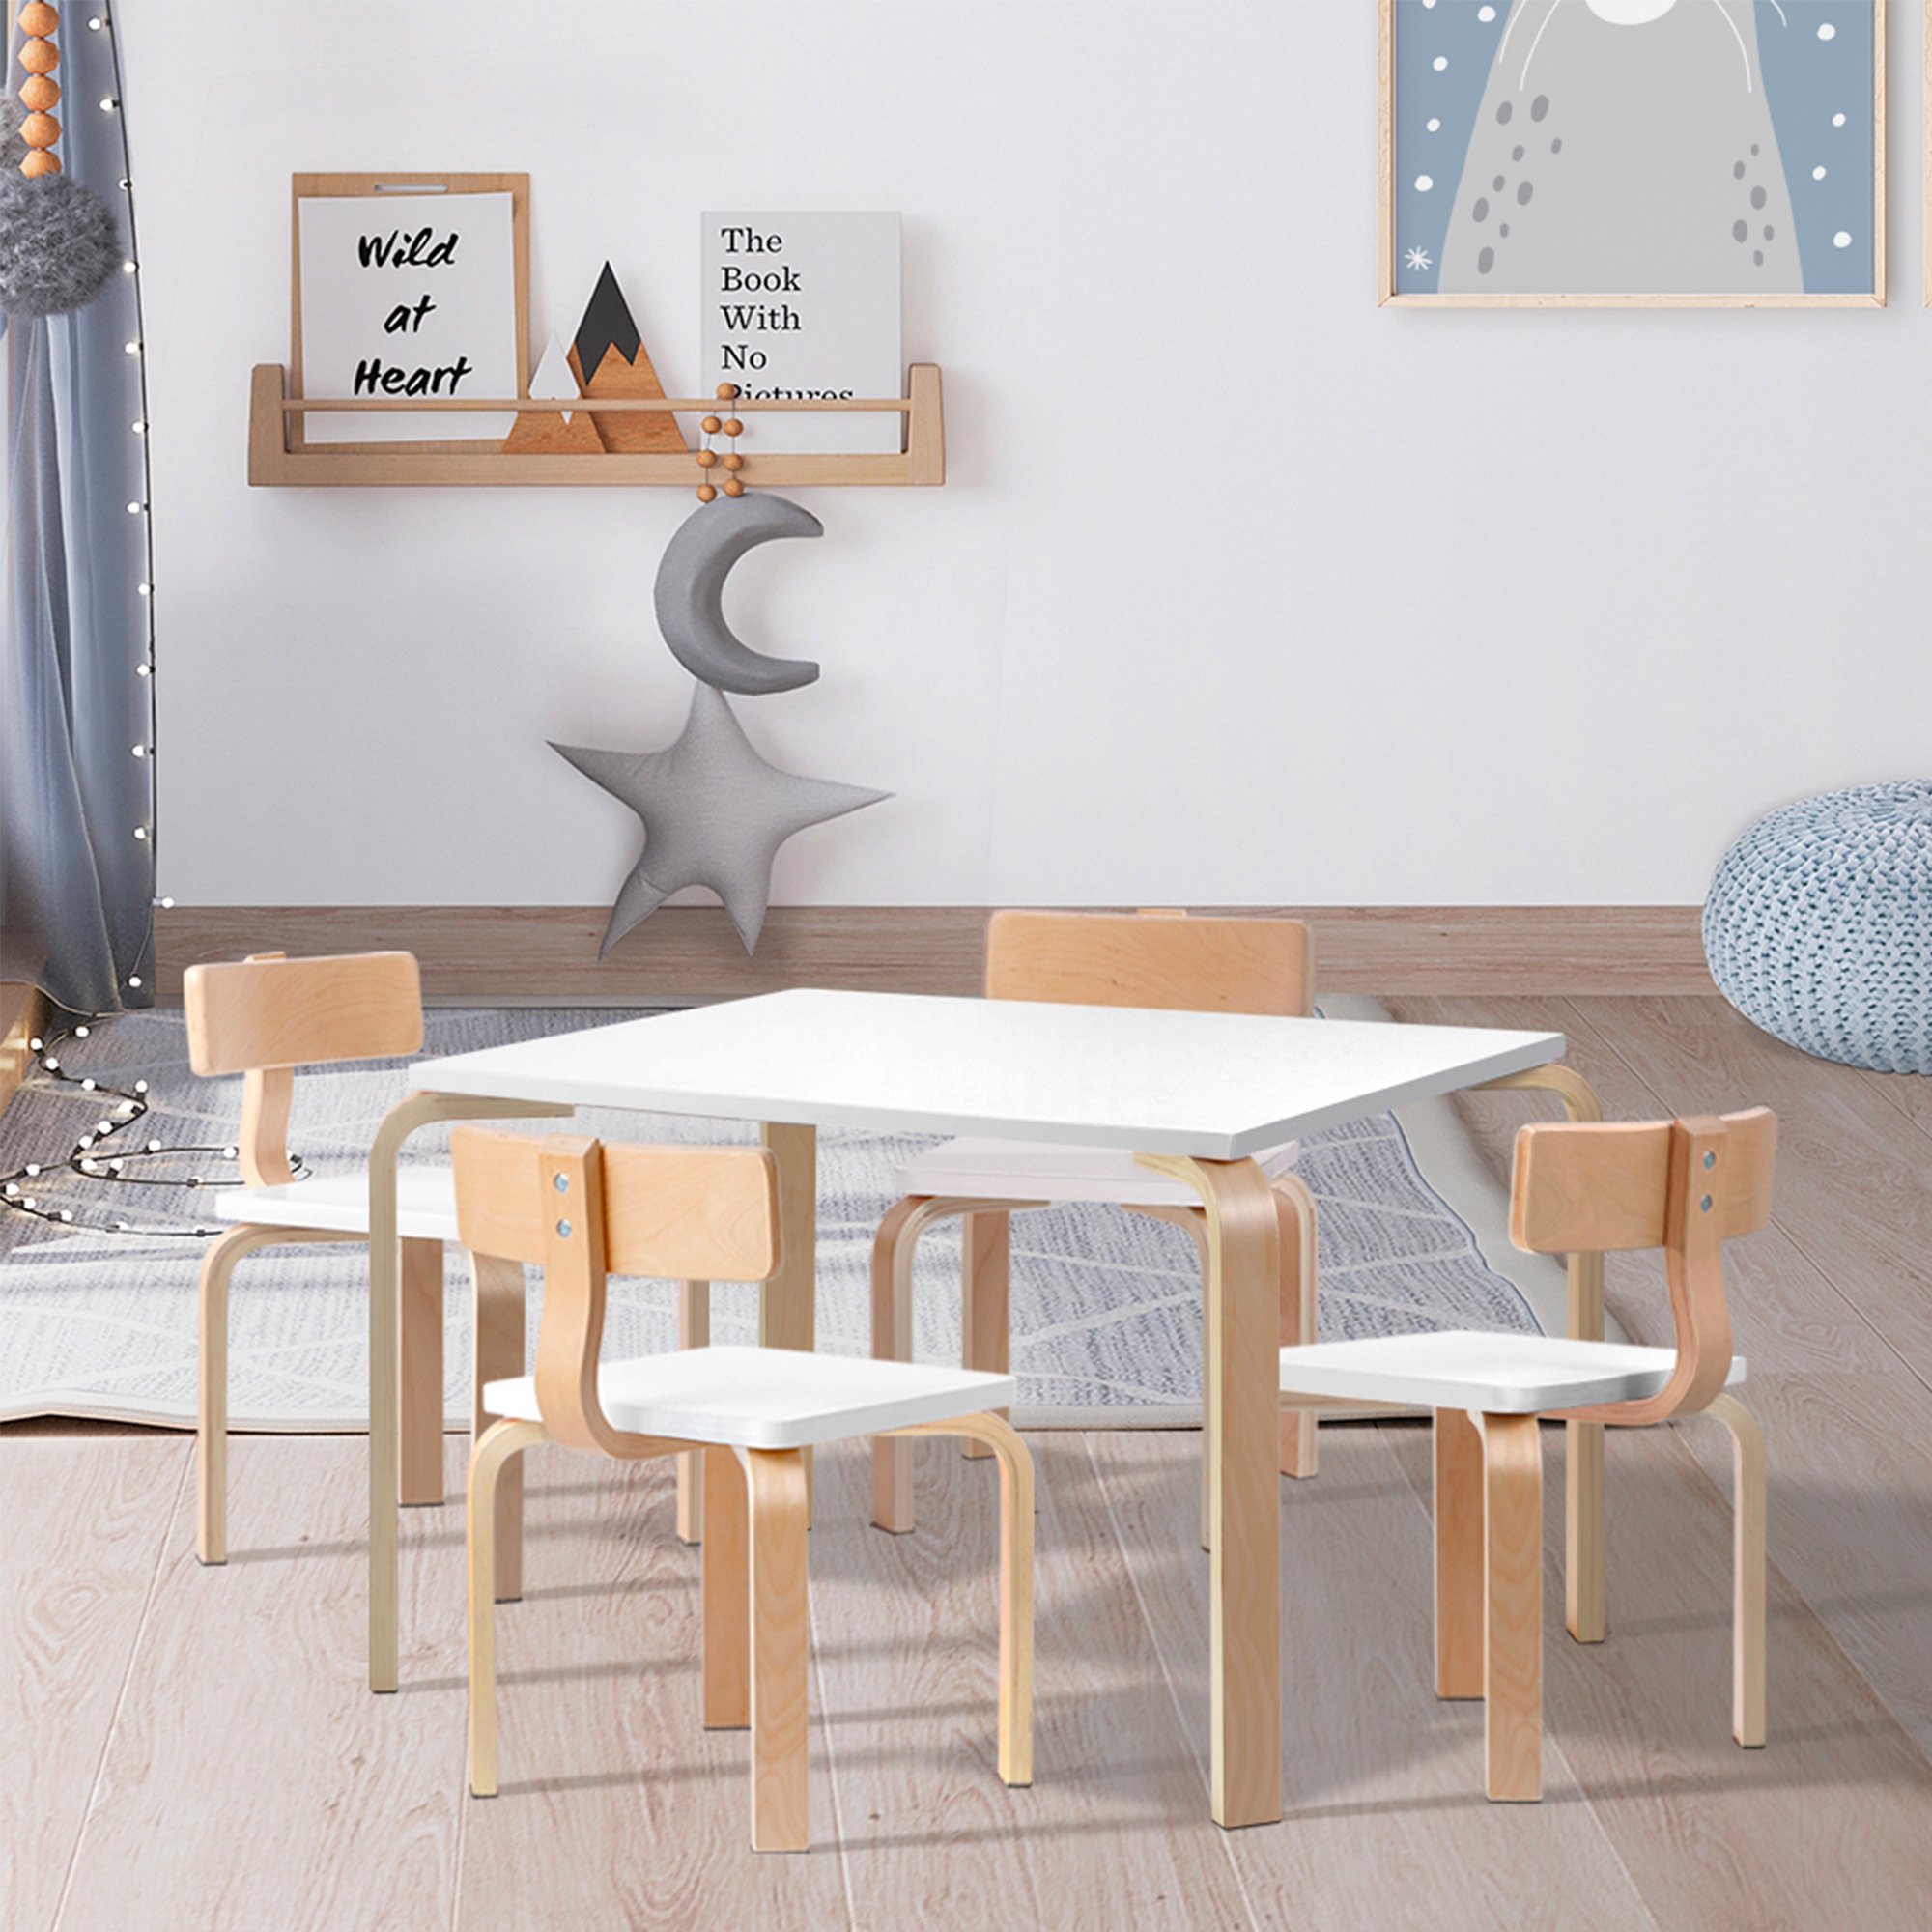 Keezi Nordic Kids Table and Chair 5pc Set Image 2